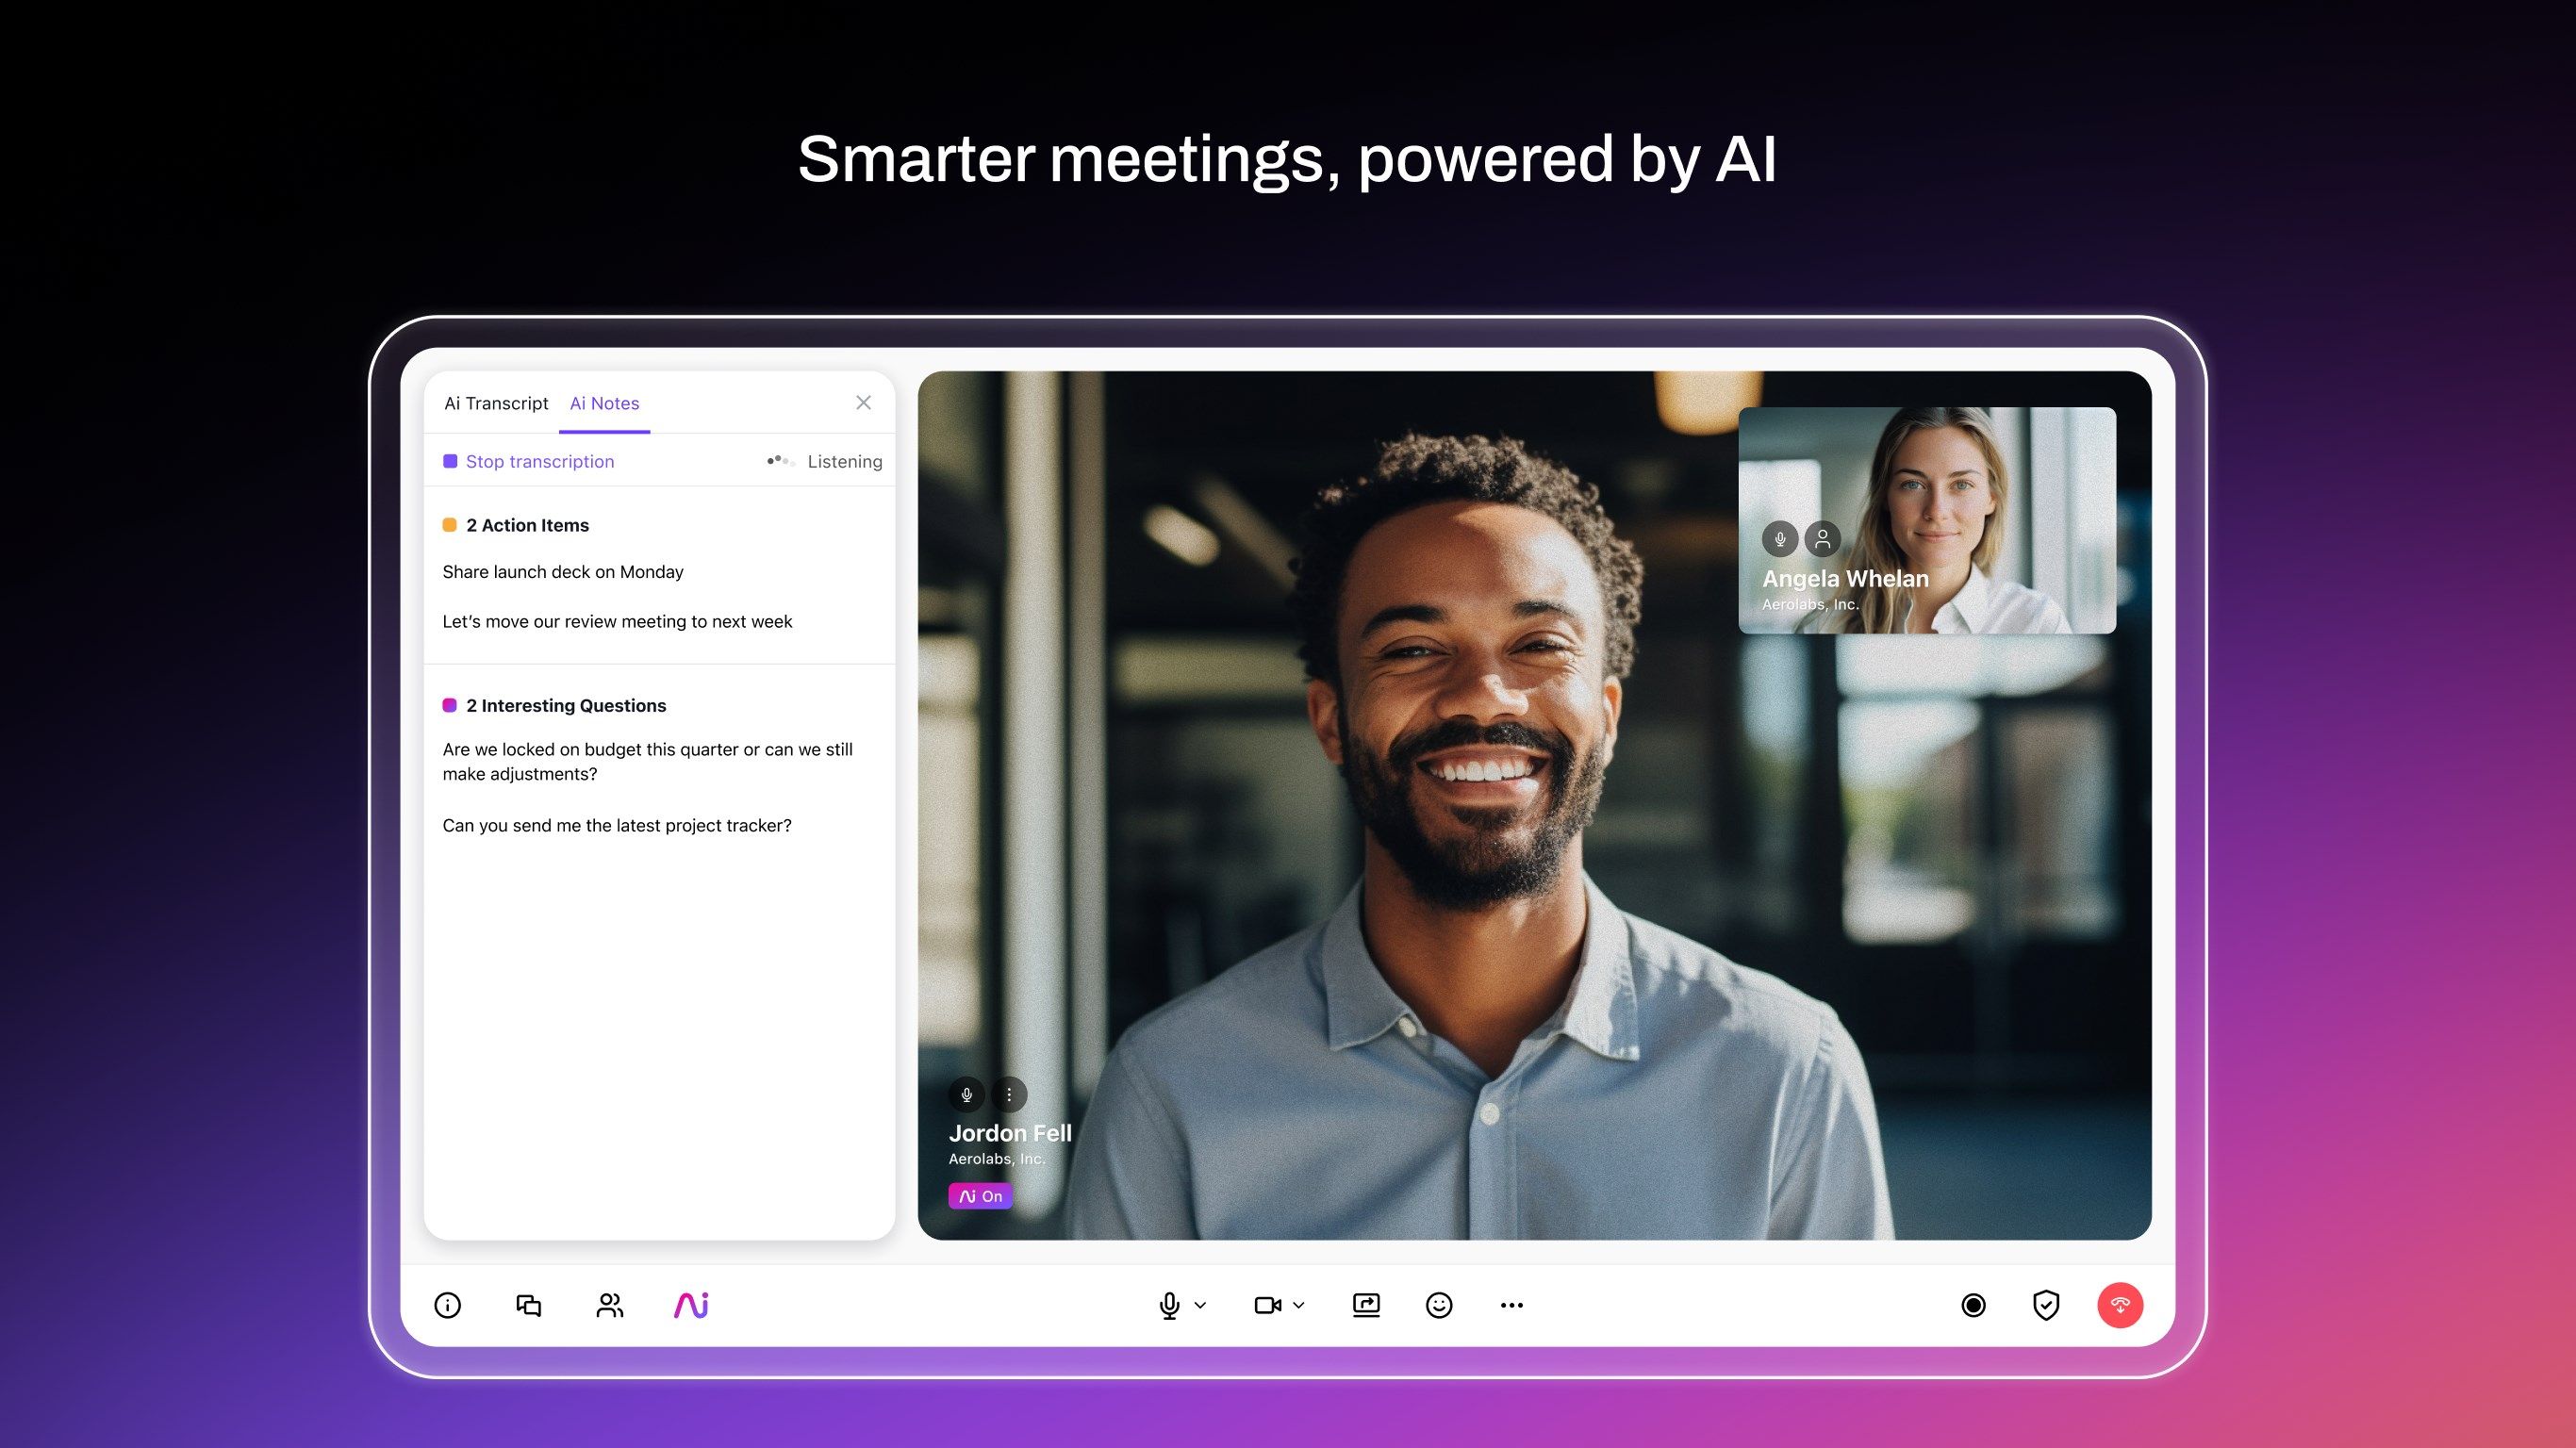 Smarter meetings, powered by AI